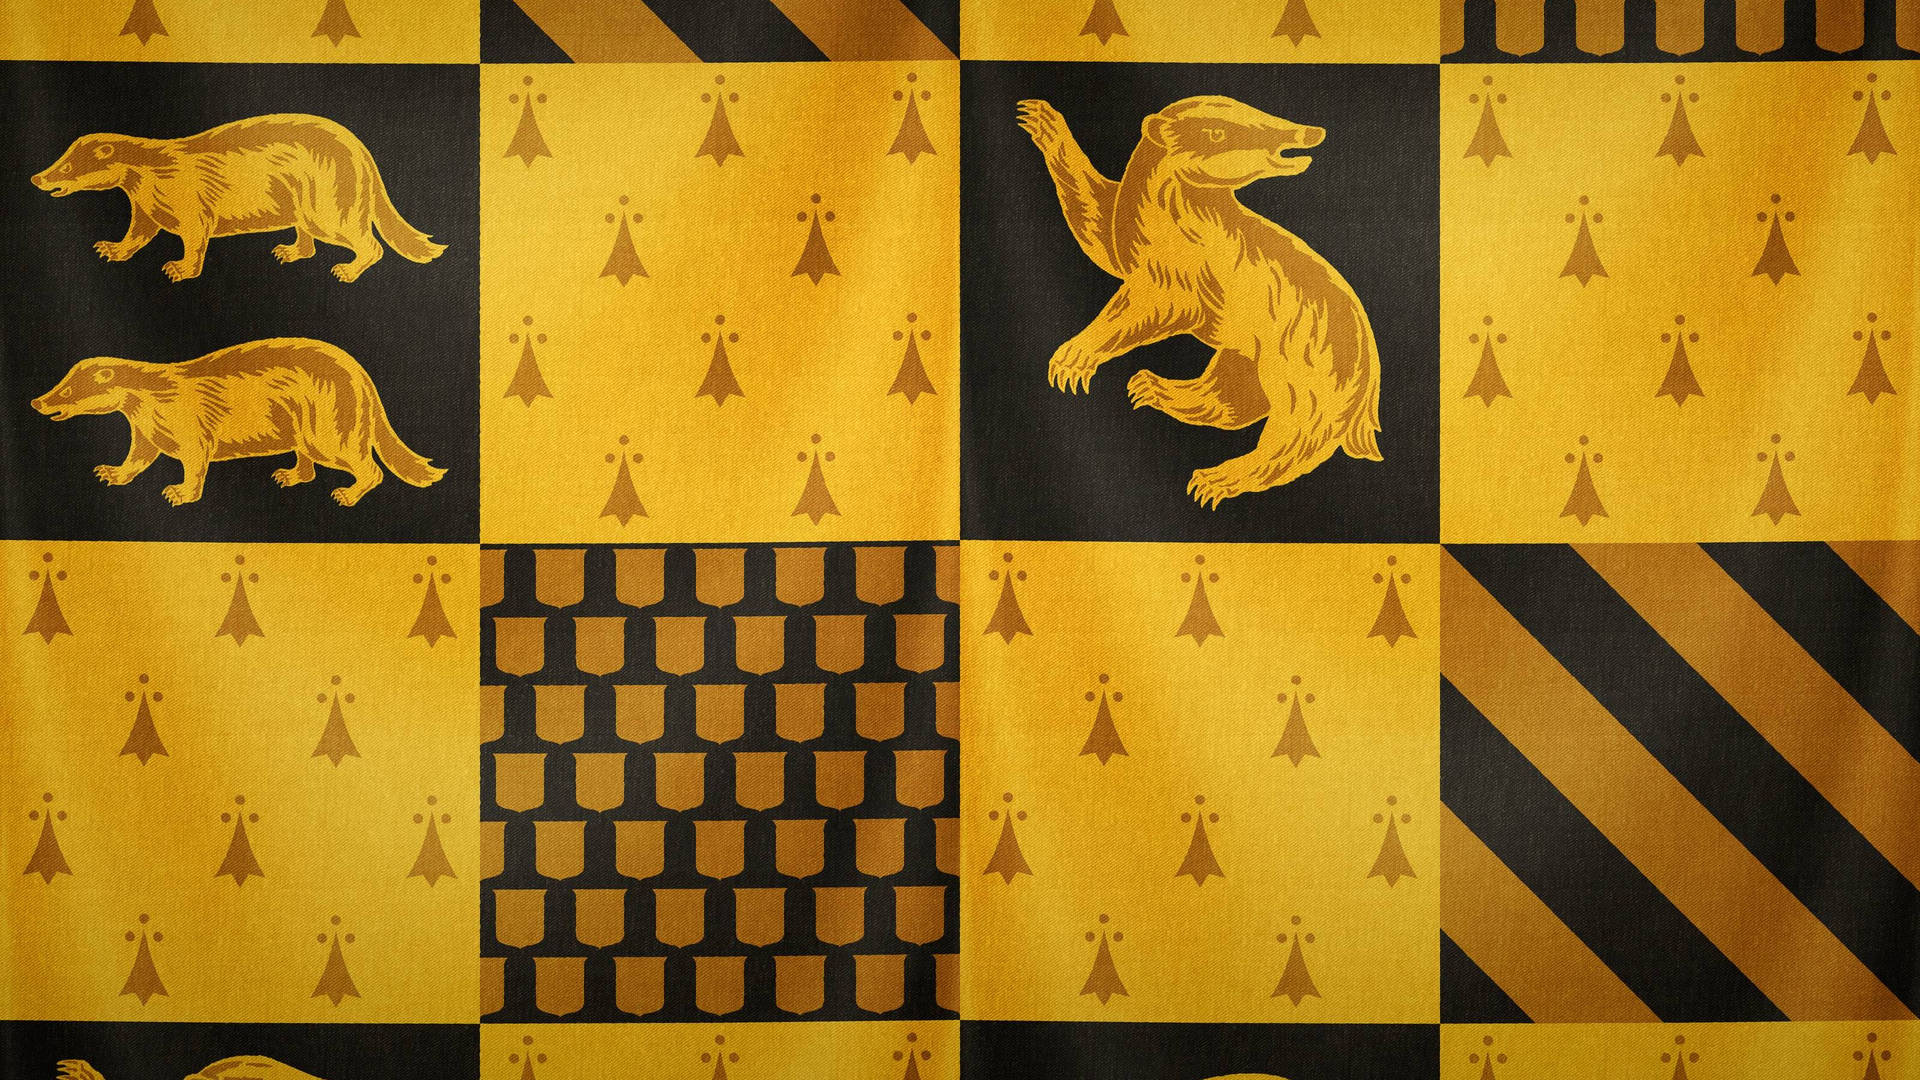 A yellow and black patterned curtain with animals on it - Hufflepuff